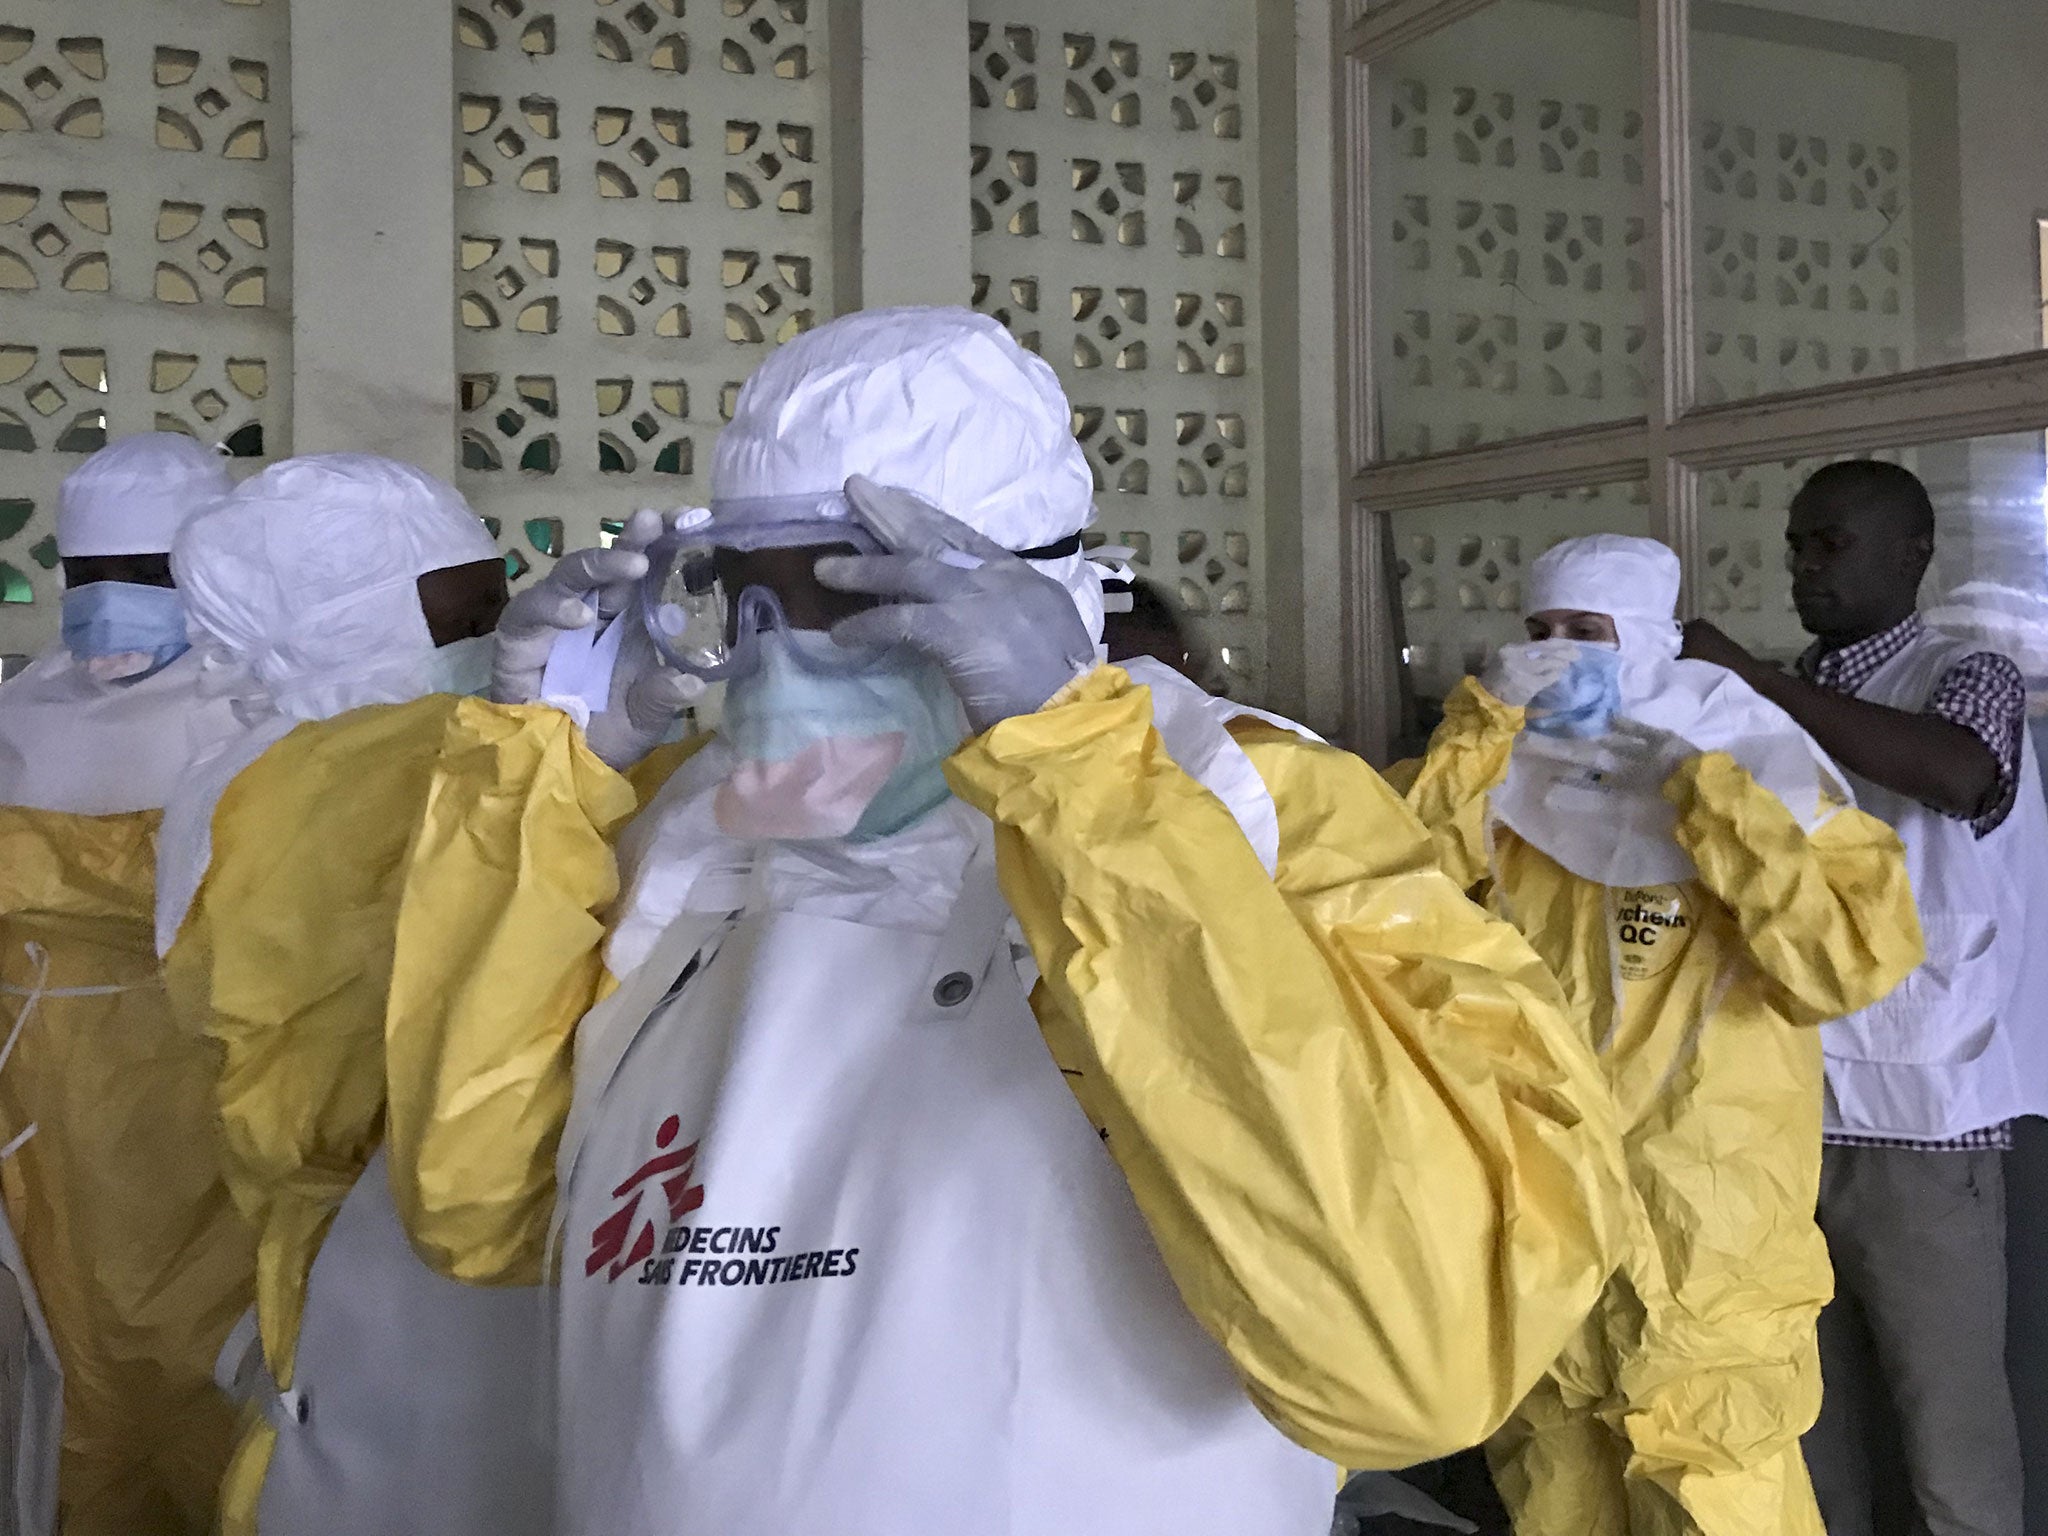 A team from Medecins Sans Frontieres (Doctors Without Borders) don protective clothing and equipment as they prepare to treat Ebola patients in an isolation ward of Mbandaka hospital in the Democratic Republic of the Congo